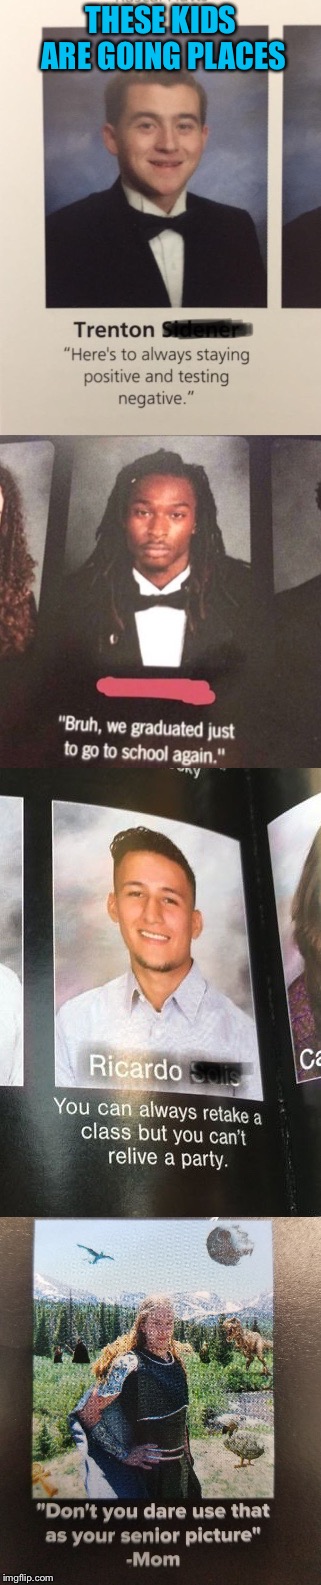 Class of Awesome | THESE KIDS ARE GOING PLACES | image tagged in funny,high school,yearbook,quotes,funny kids | made w/ Imgflip meme maker